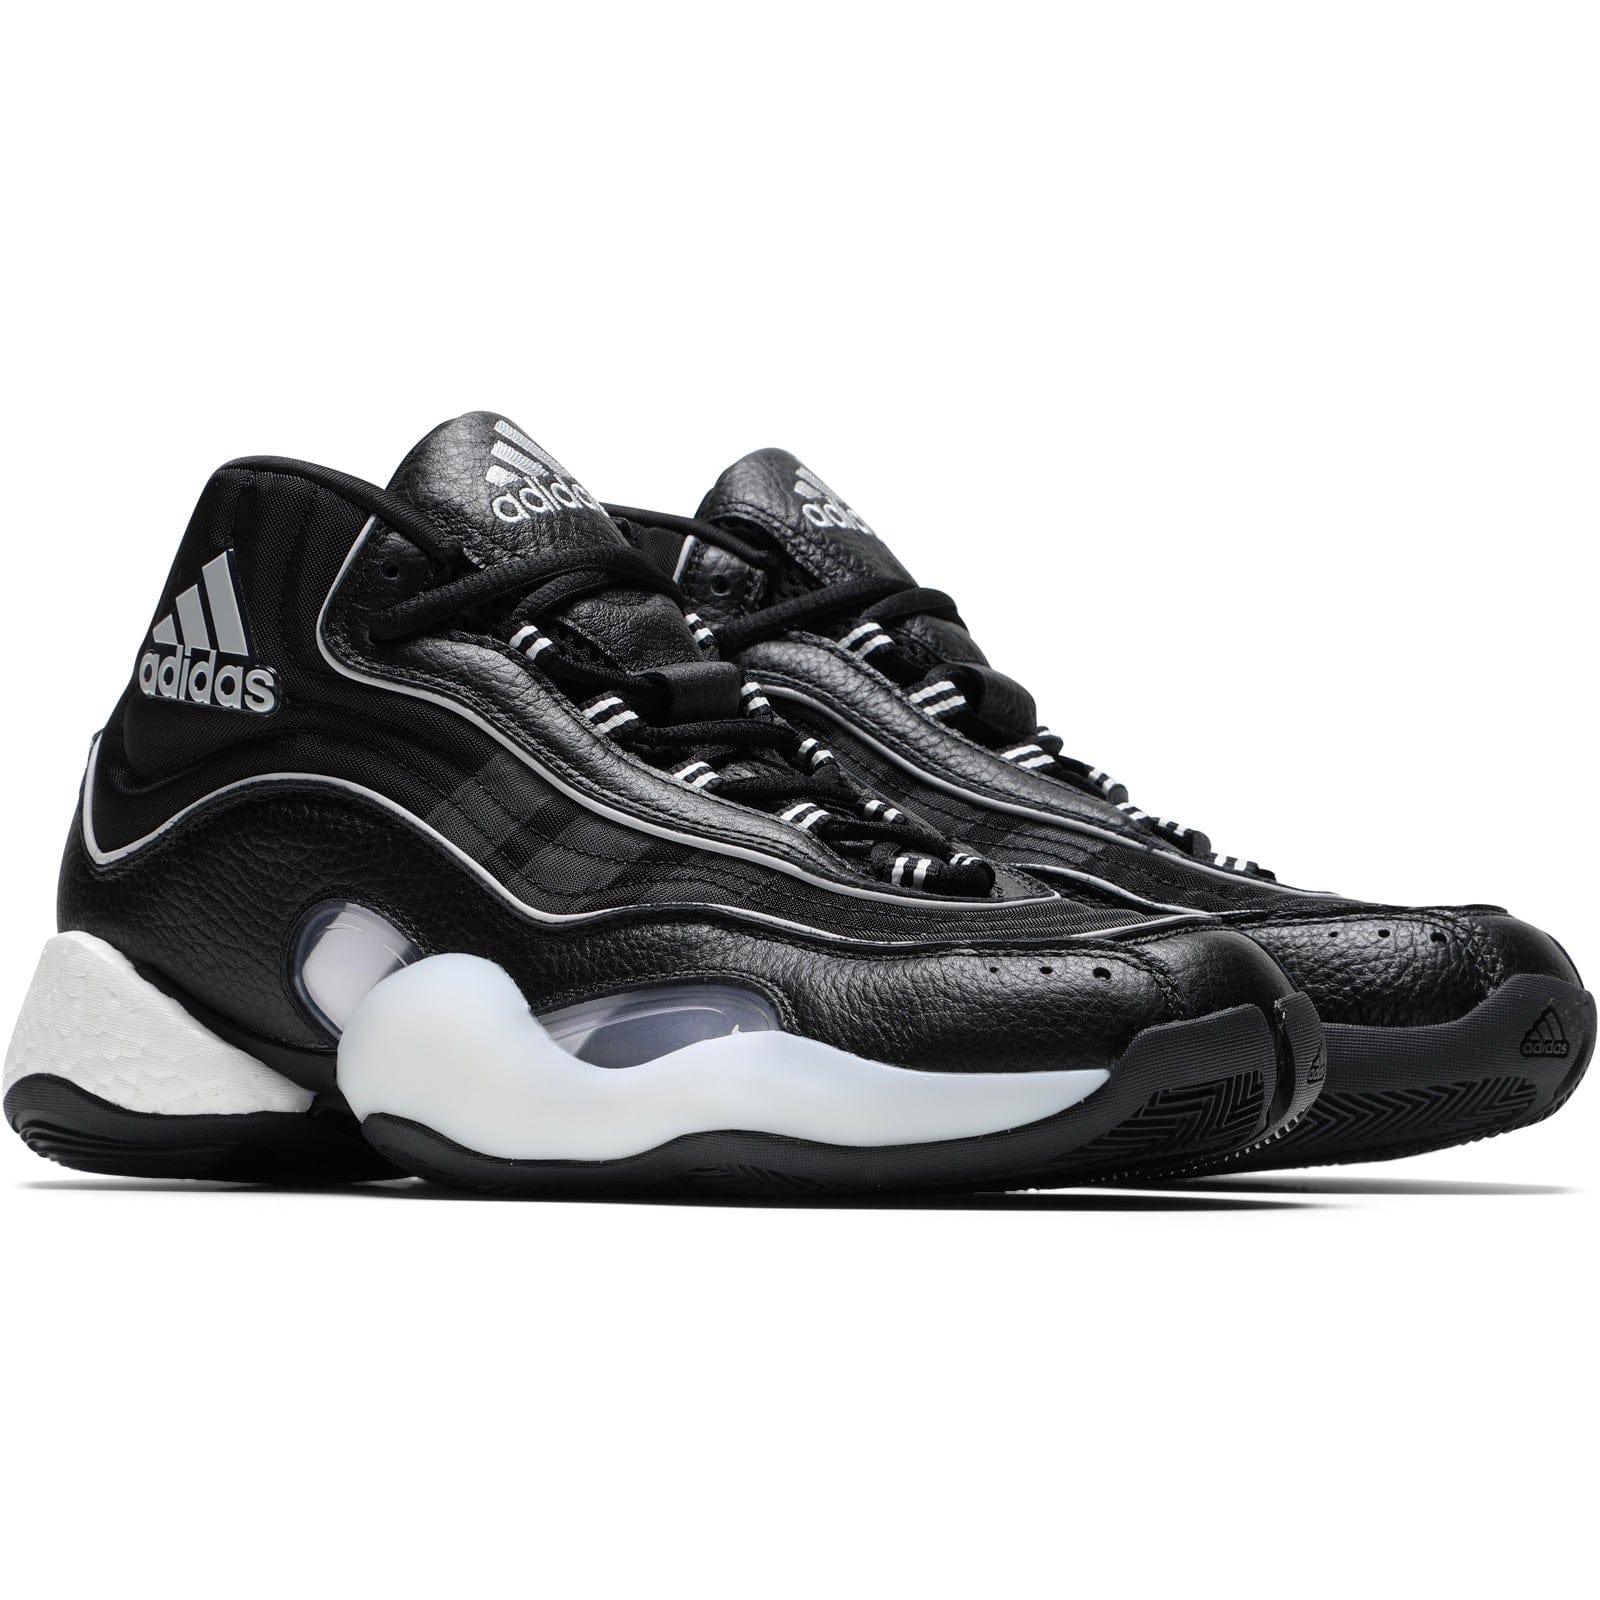 Adidas MENS FOOTWEAR - Mens Release Product Shoe CBLACK,GRETWO,CWHITE / 7.5 / G26807 Never Made CRAZY BYW